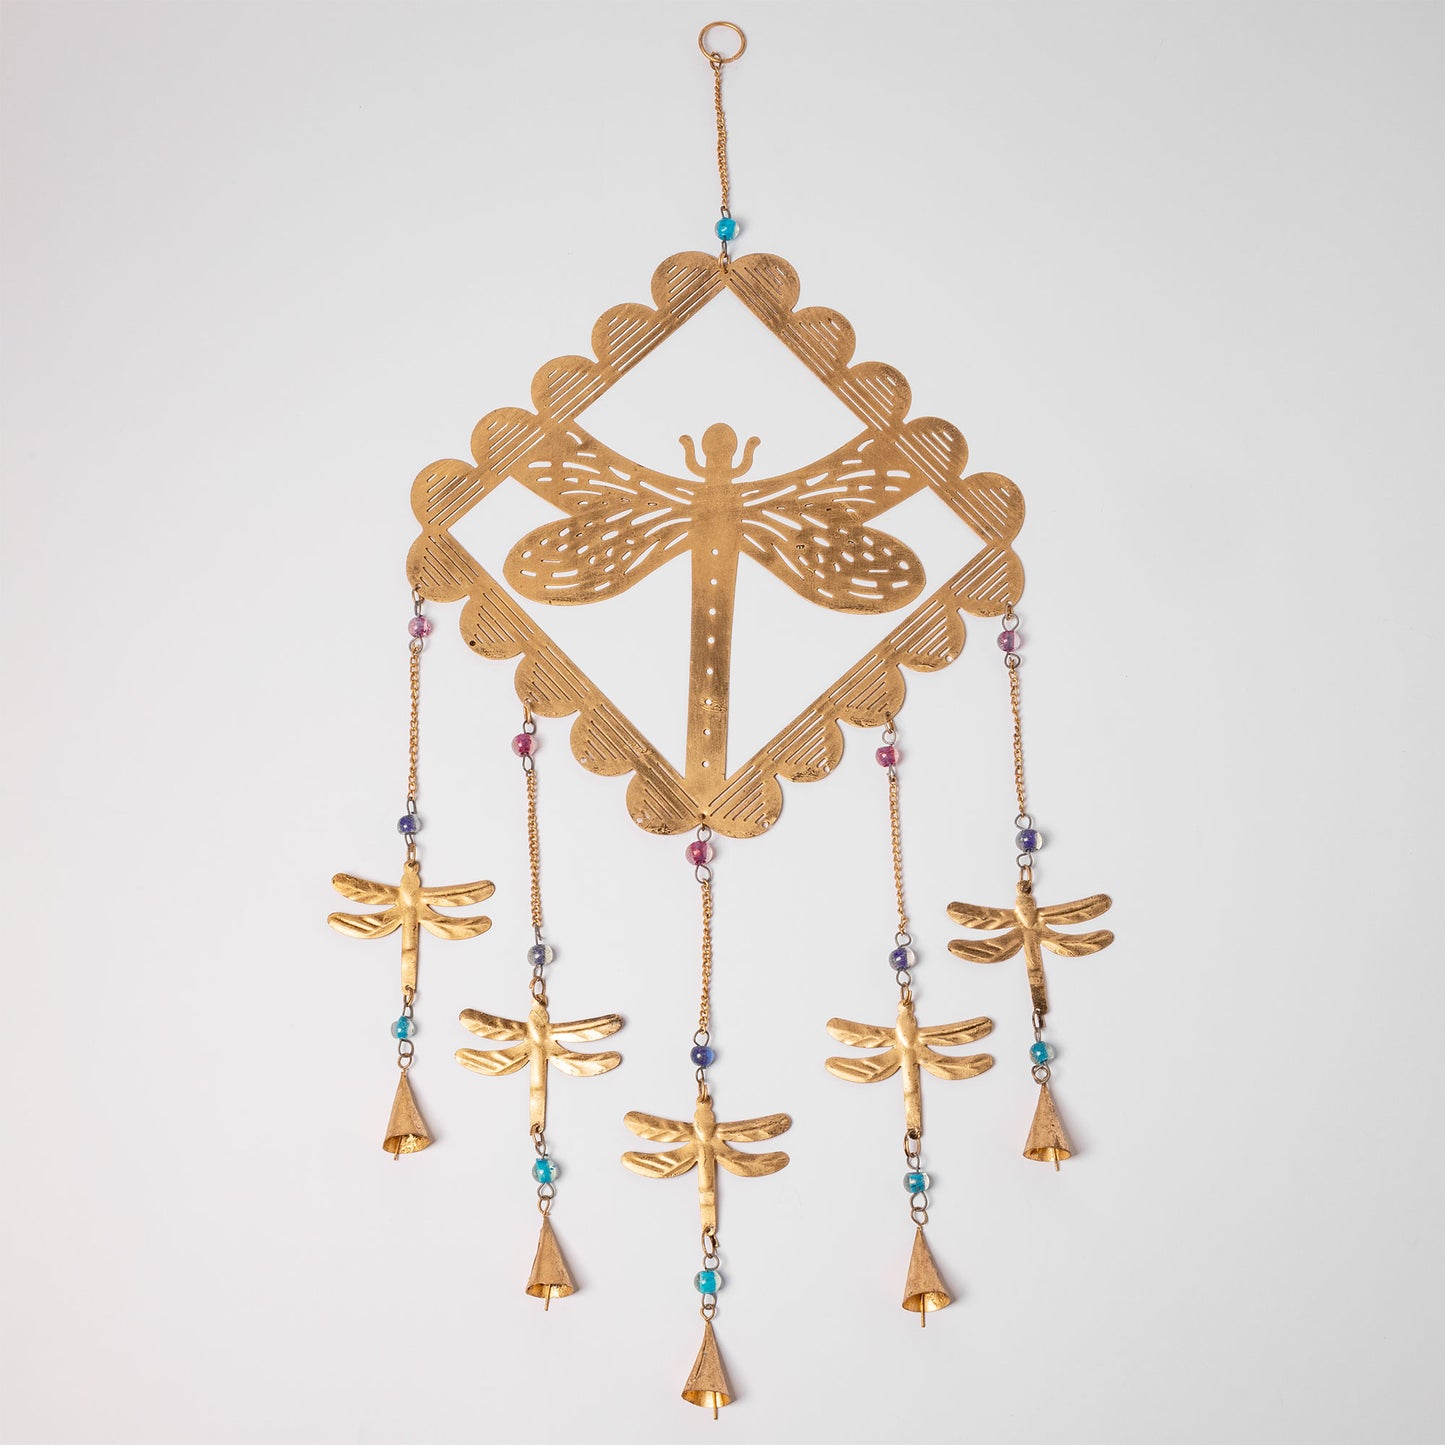 Dragonfly Beaded Iron Wind Chime